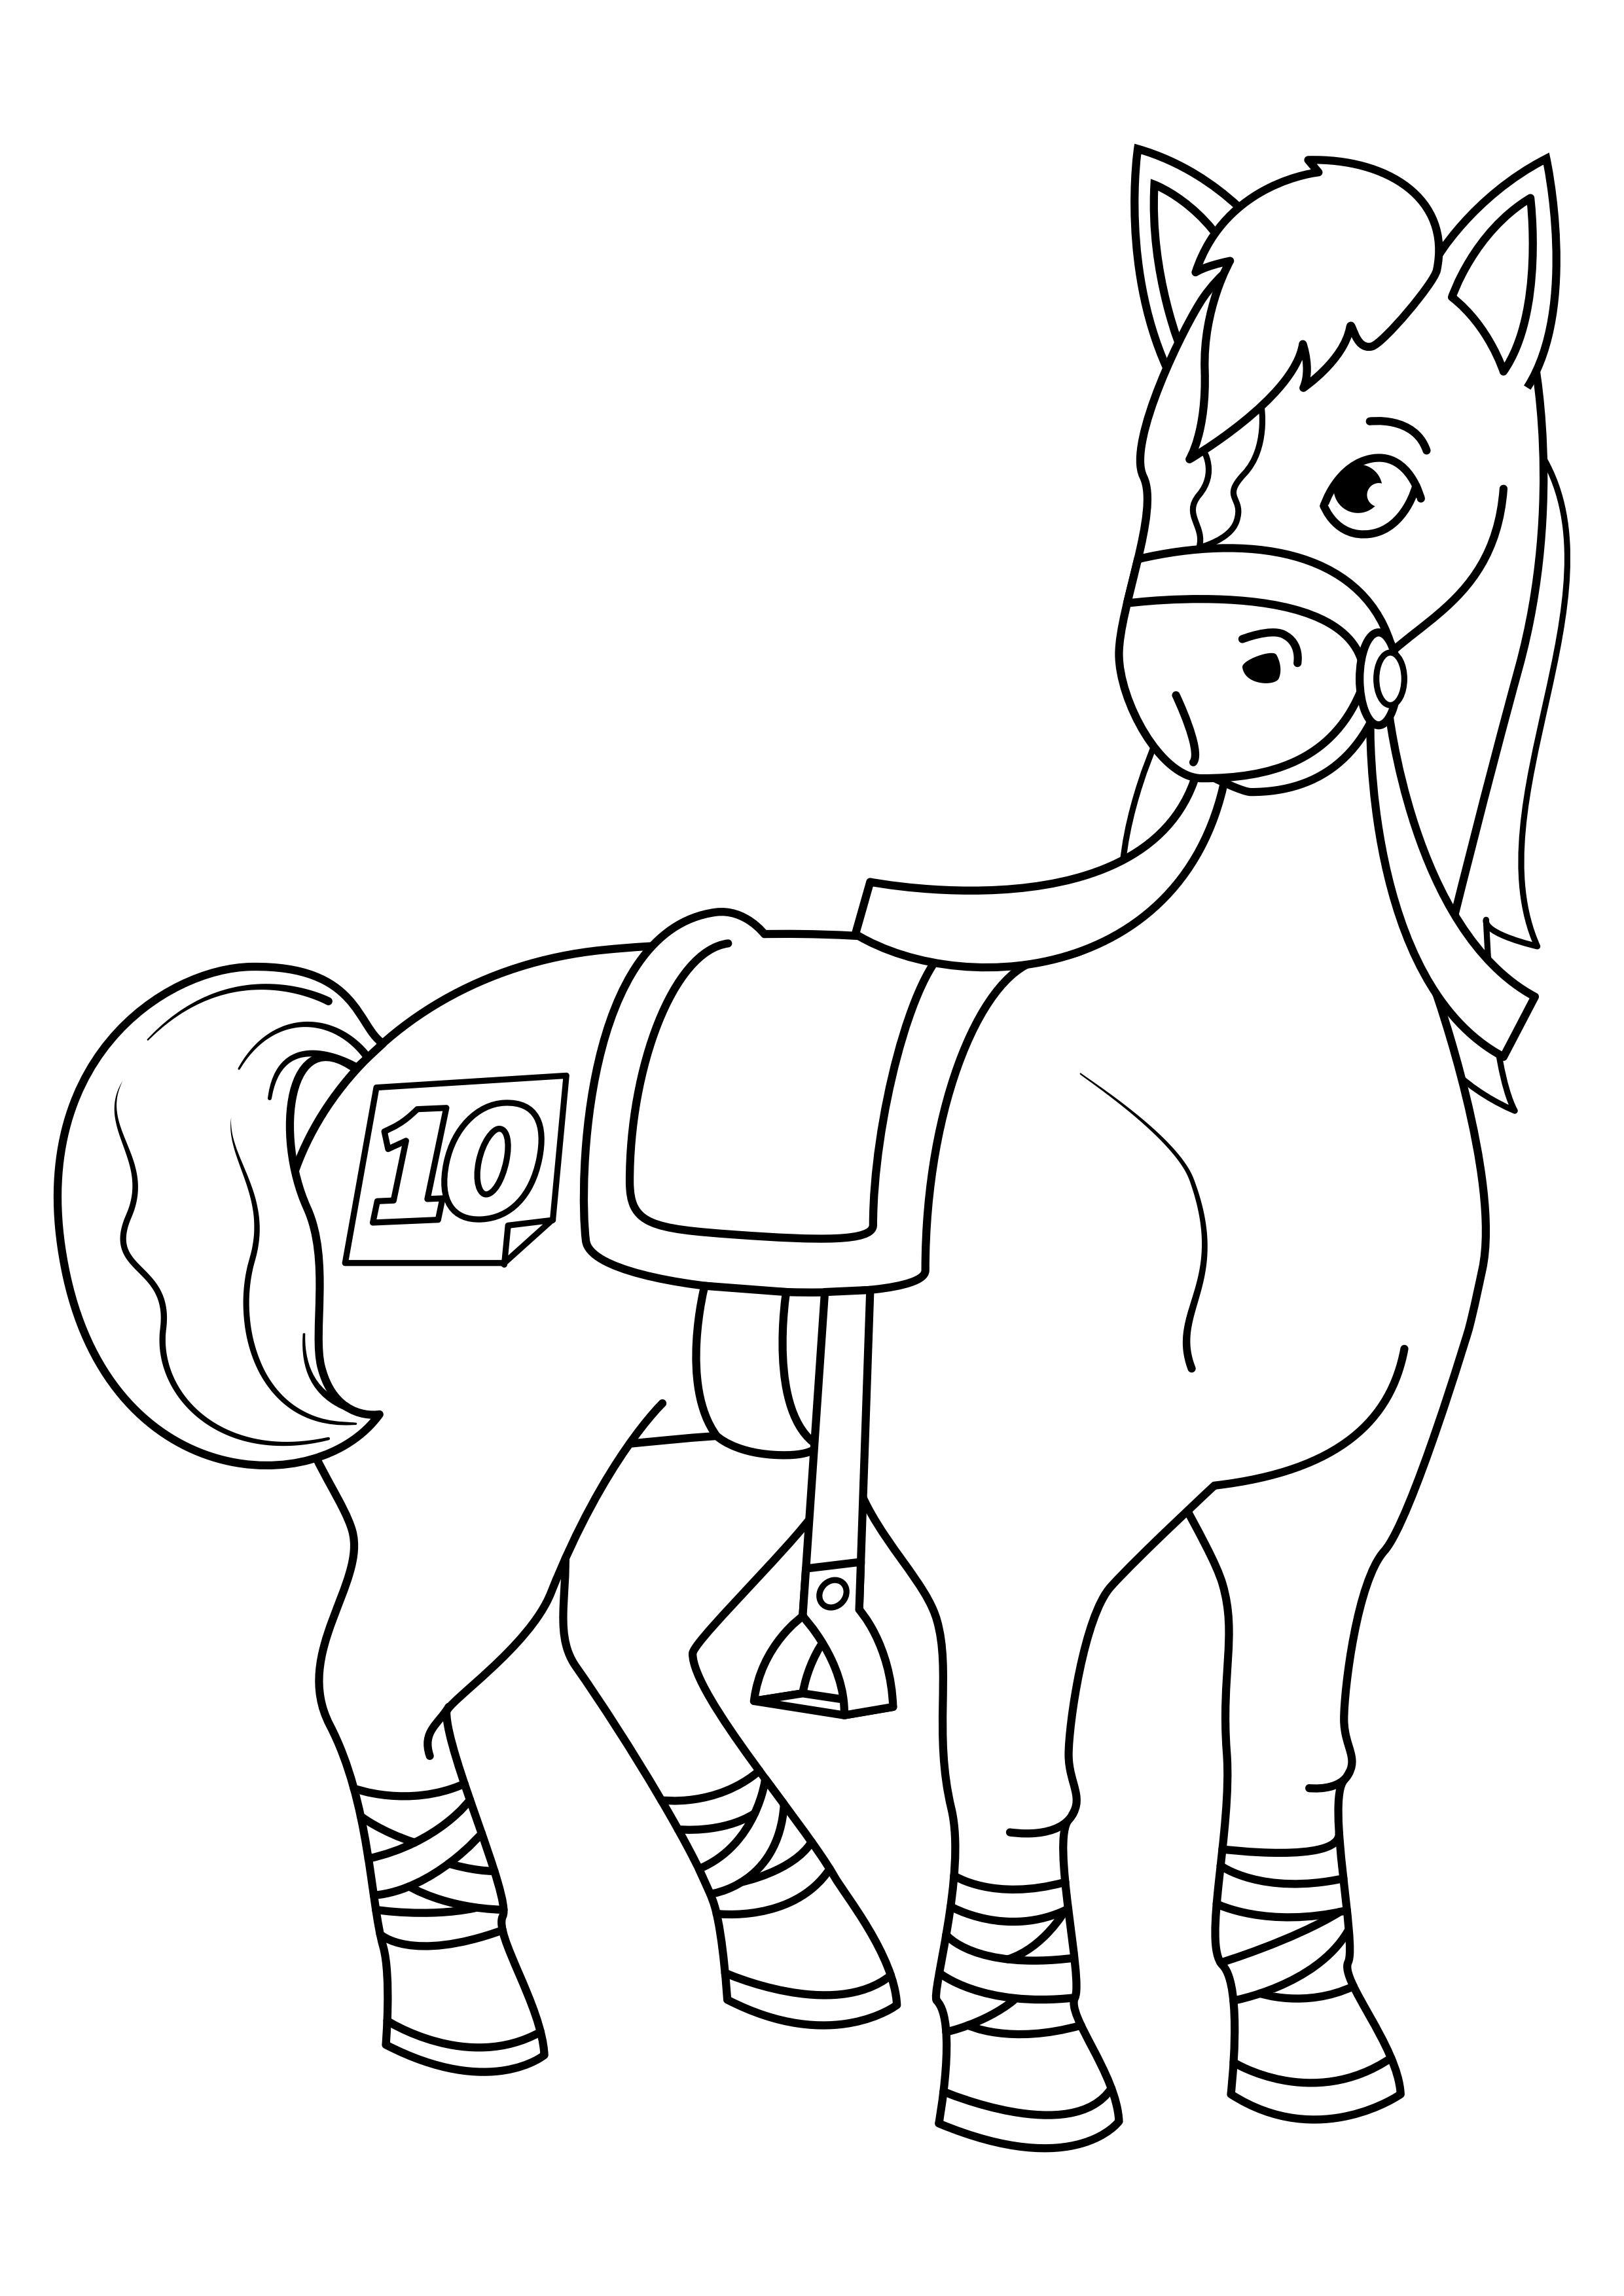 Coloring page horse on competition